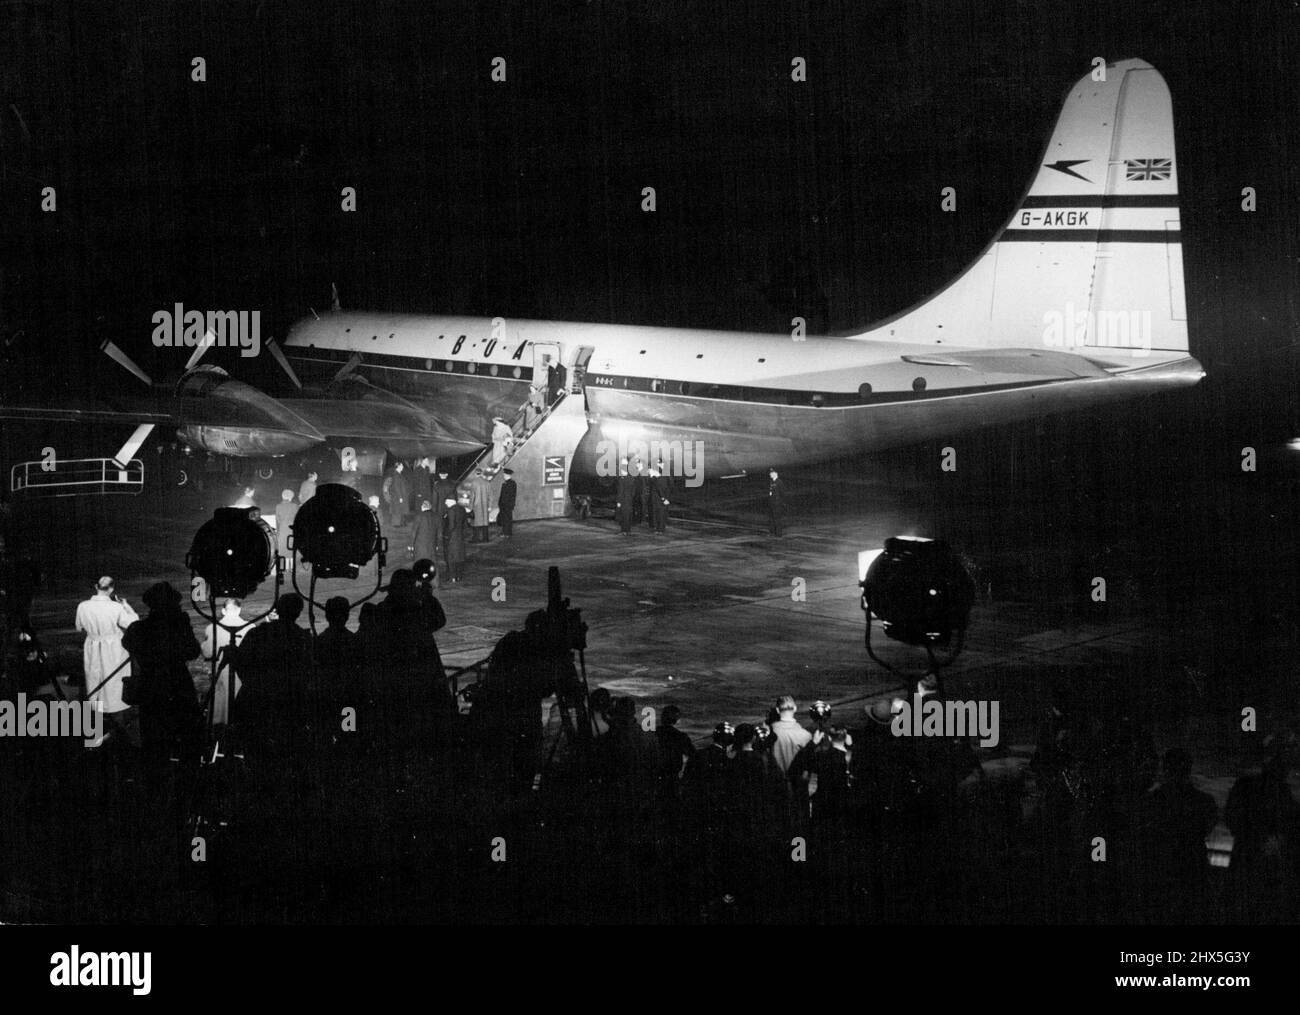 Royal Couple Off To Canada -- The Floodlights playing on the huge Canopus. In their glare the Queen, Followed by Princess Margaret, is seen walking down the Gangway. The goodbyes have been said. and a few minutes after this picture was taken the Royal Plane Took off. Scenes at London Airport last night when Princess Elizabeth and the Duke of Edinburgh were boarding the Strato-Cruiser Canopus for their 3,400-mile flight to Canada. October 08, 1951. (Photo by Paul Popper). Stock Photo